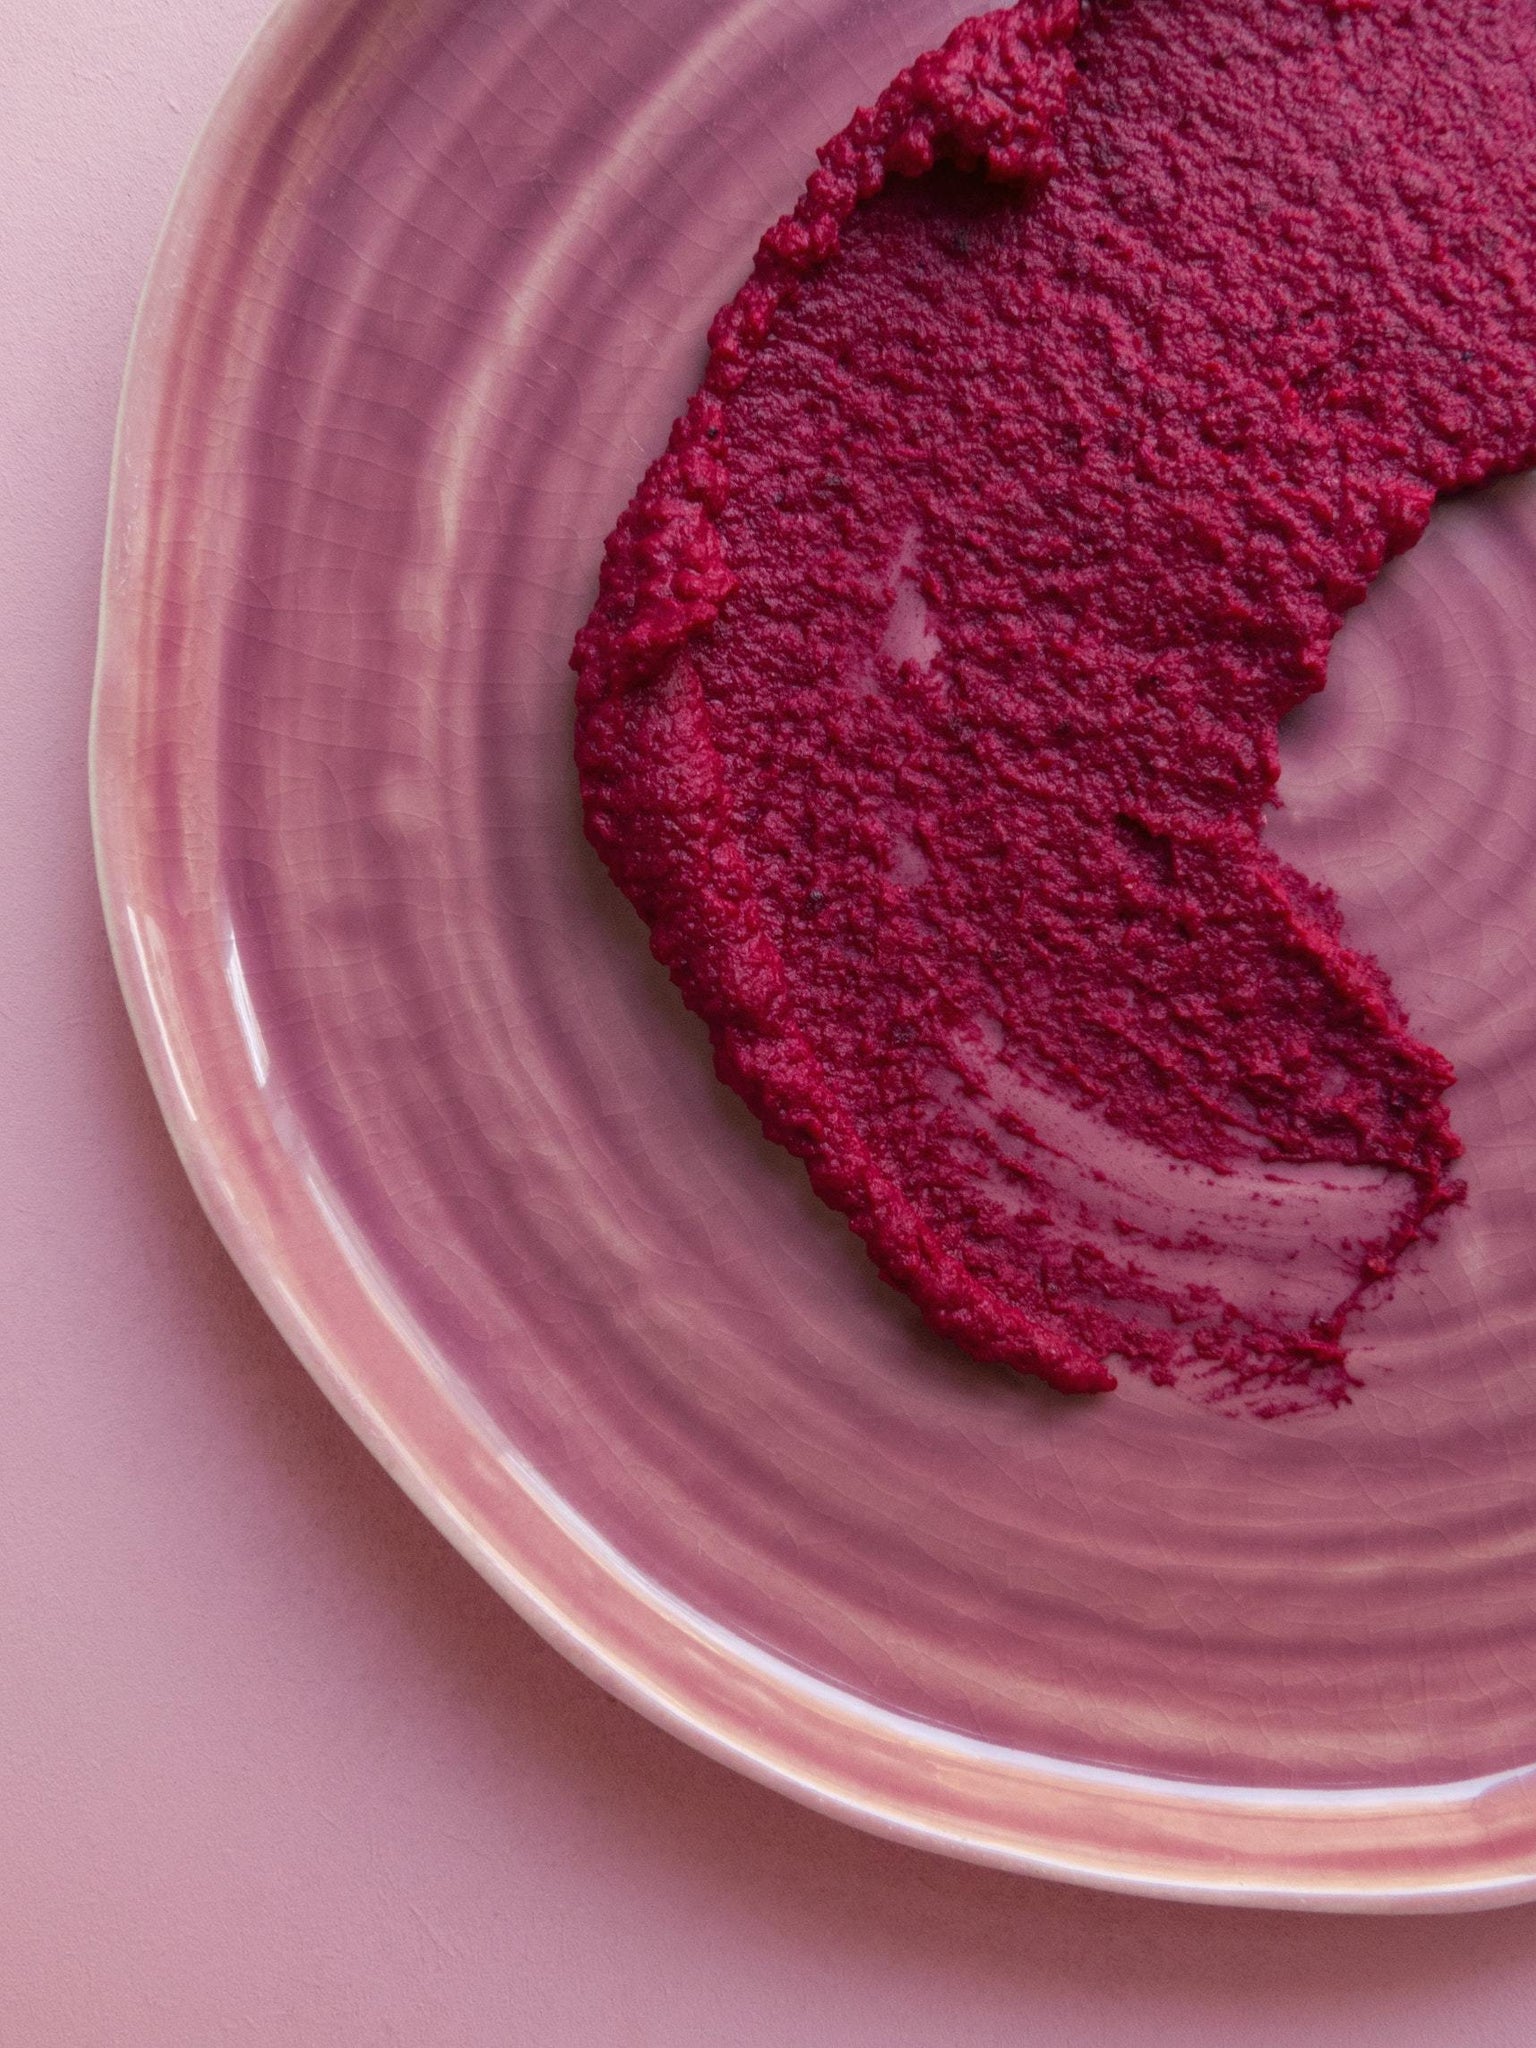 3 Recipes that Use Beetroot